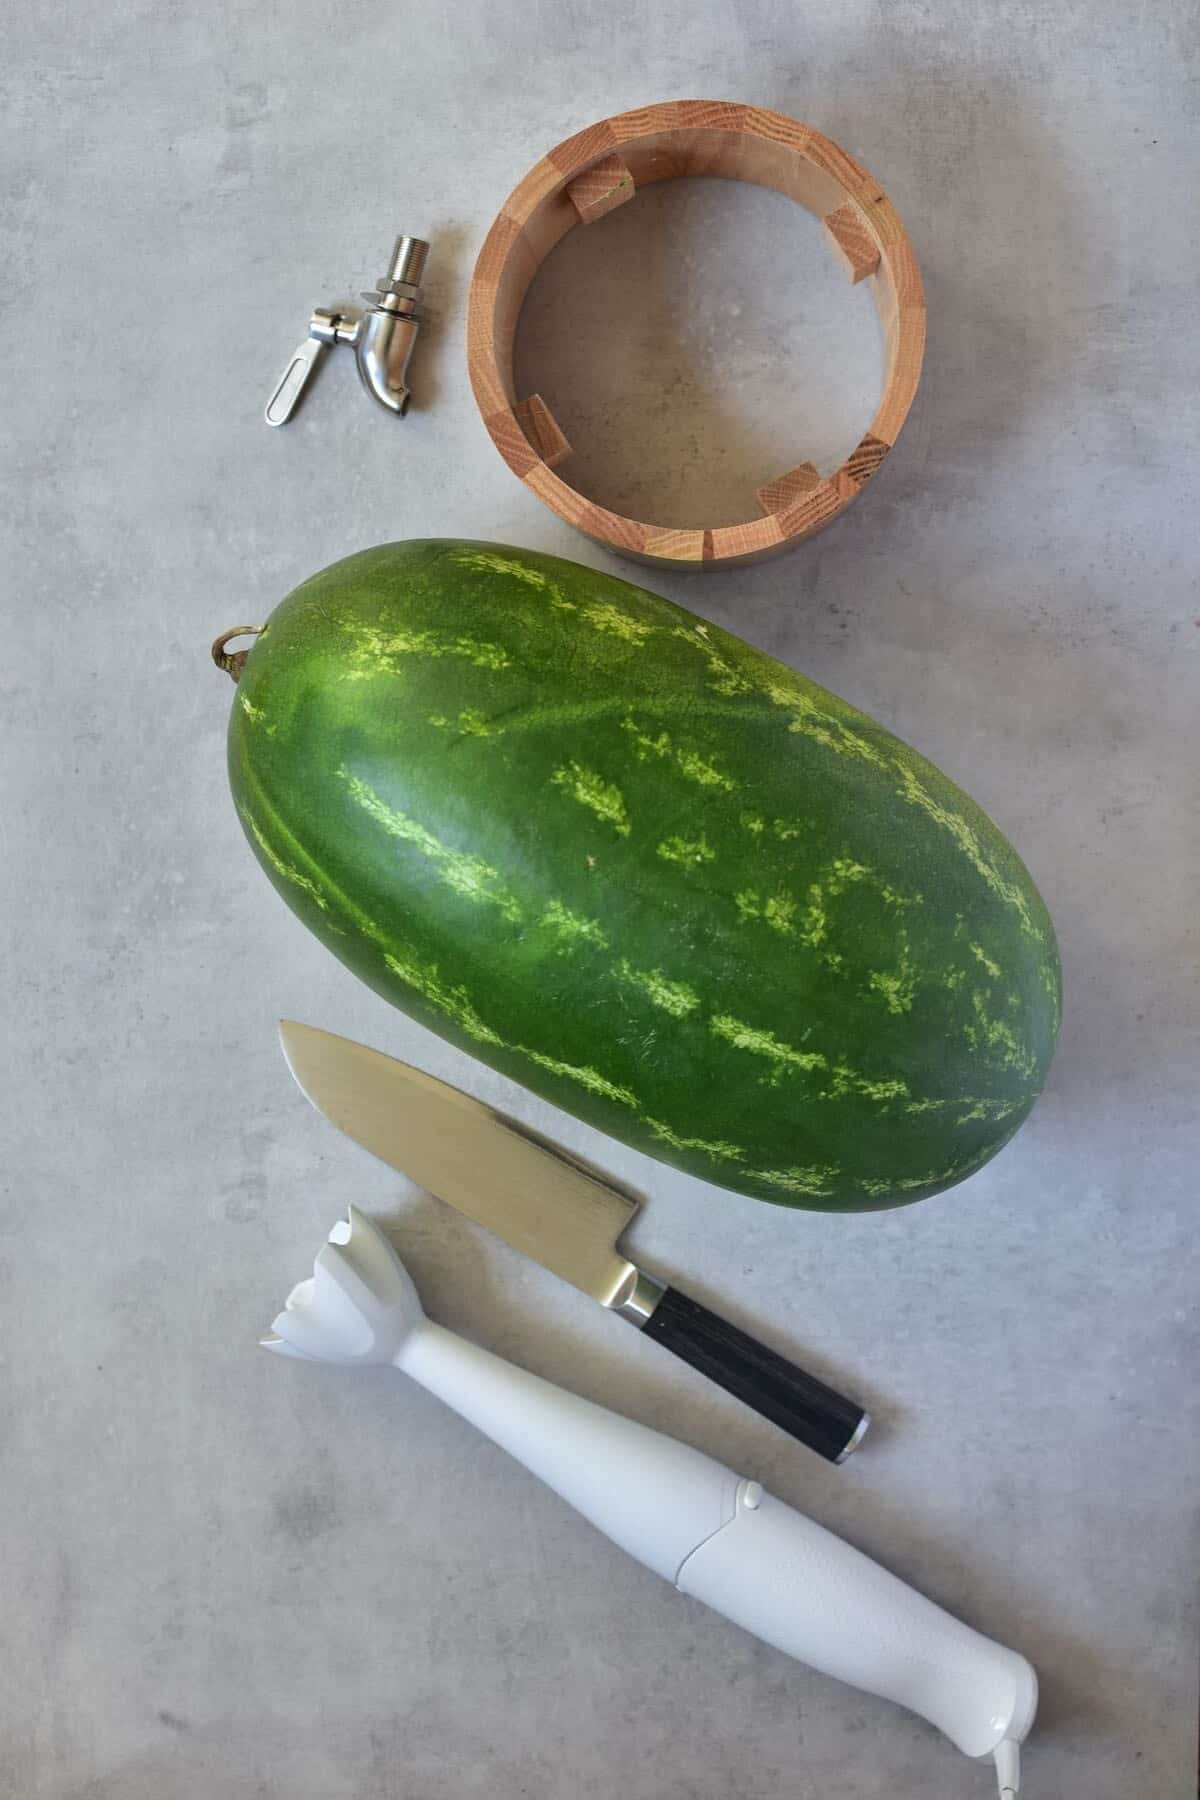 The tools needed for watermelon keg